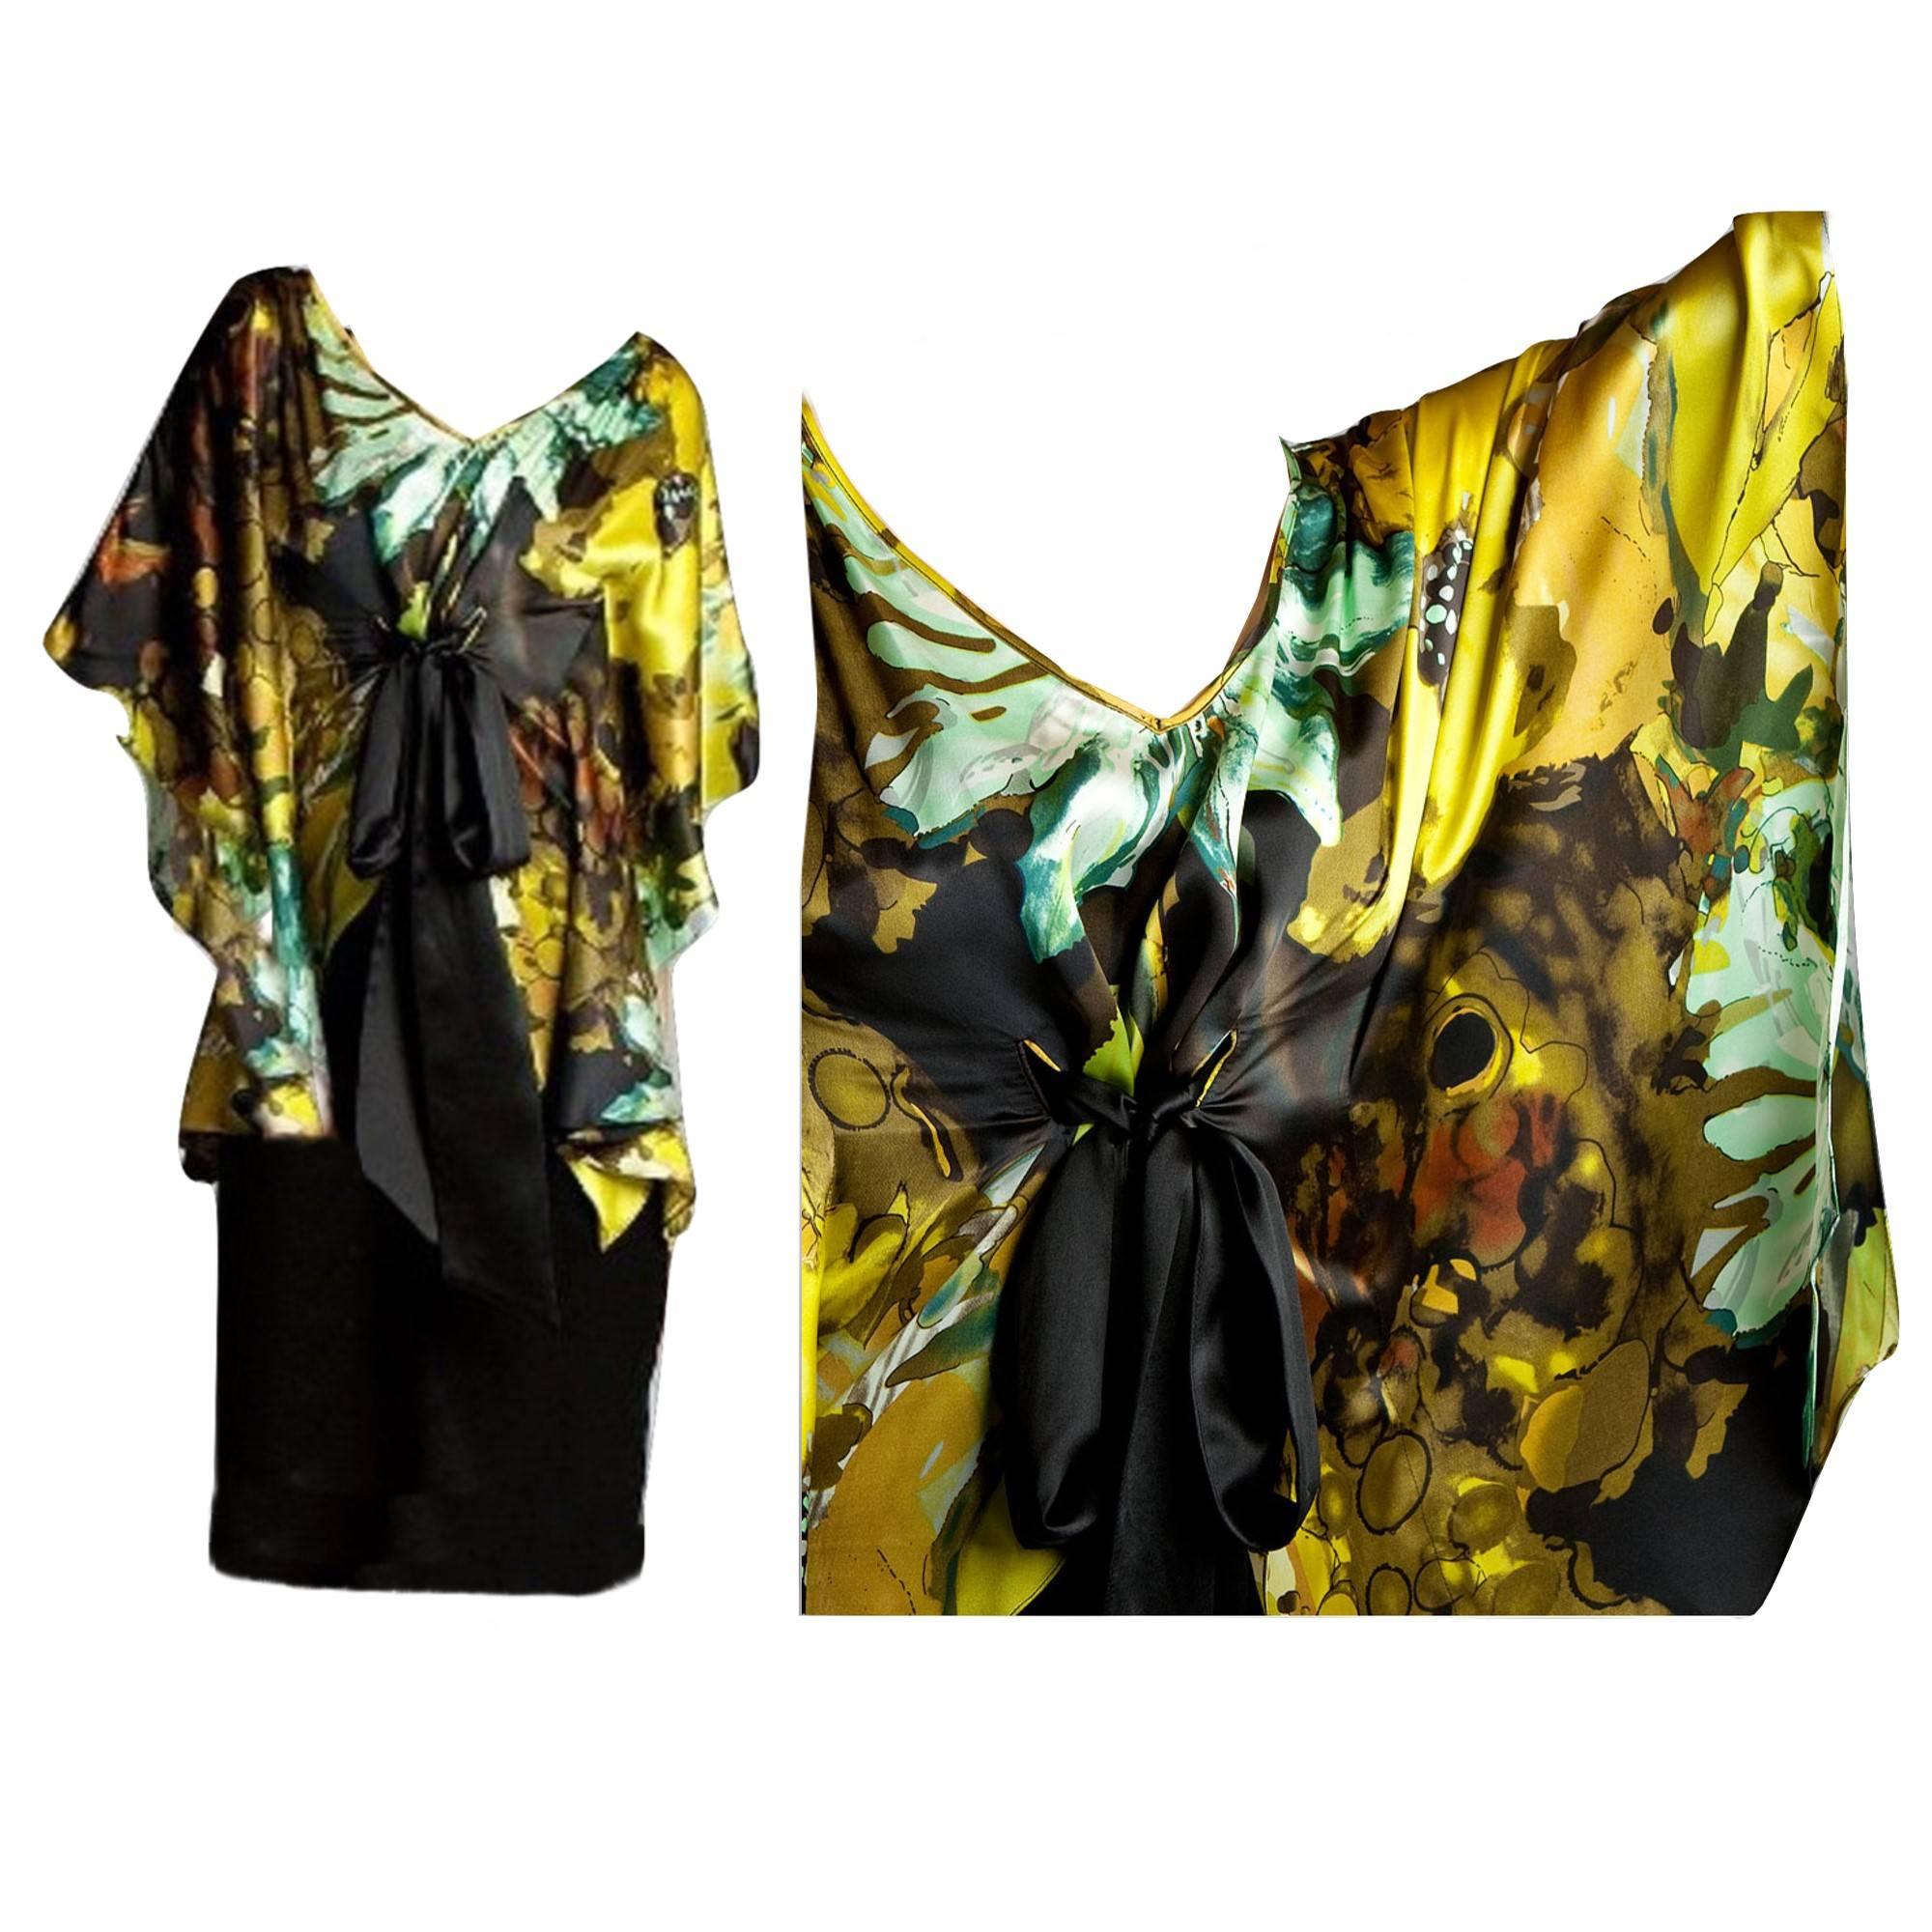 Badgley Mischka Dress
Brand New with Tags
Soft Silk Dress with a printed abstract flower pattern 
poncho style top and black silk layer beneath
Black Silk tunnel tie at front
Top is 100% Silk 
Slip is 100% Silk
We are happy to provide measurements